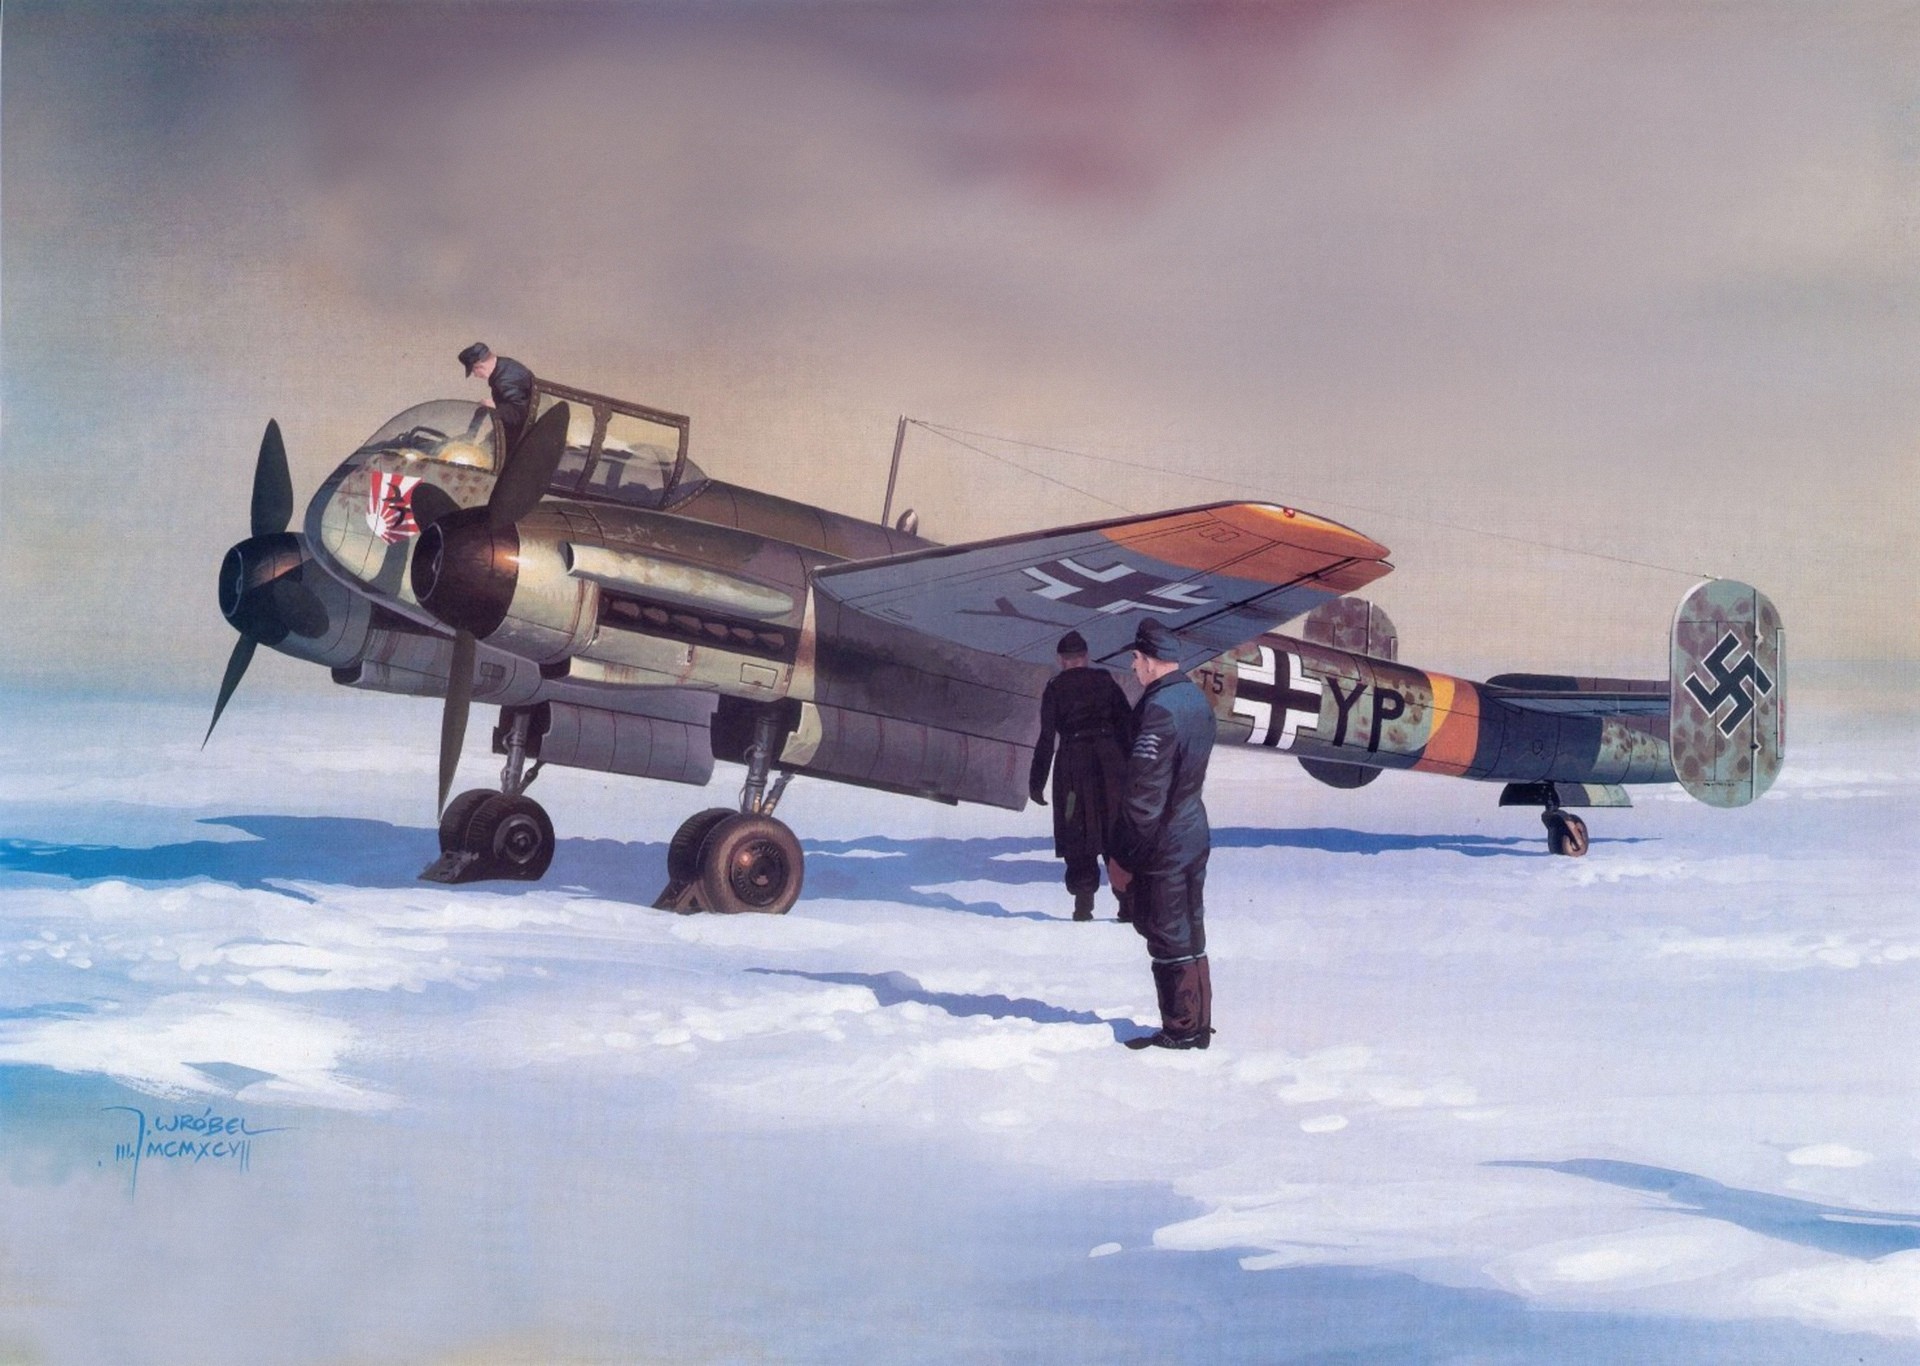 General 1920x1366 World War II airplane aircraft military military aircraft Luftwaffe winter snow cold vehicle military vehicle German aircraft Arado Germany standing sky men soldier